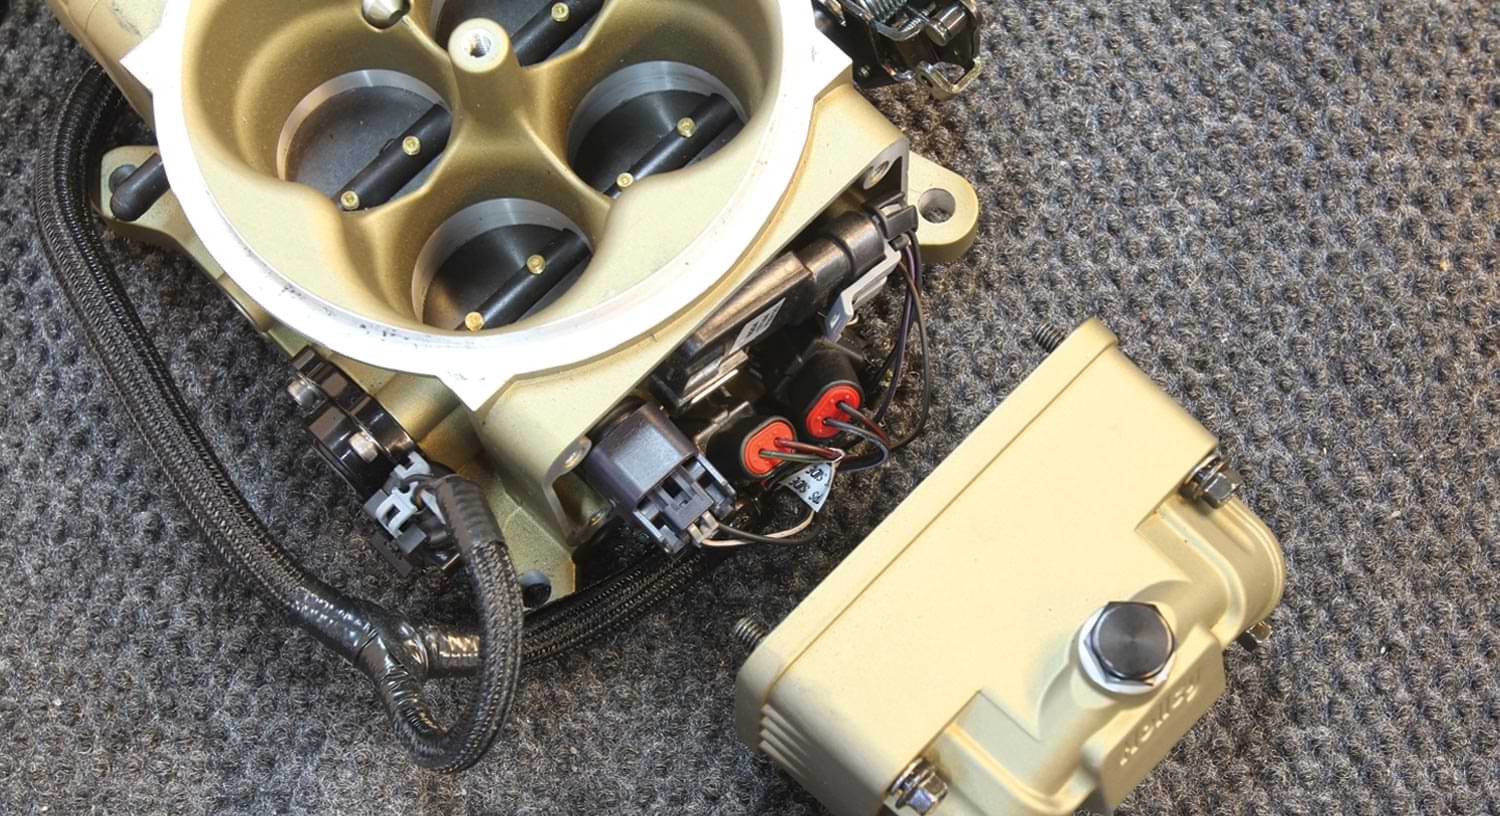 a Holley Terminator Stealth throttle body with the side bowl removed showing the hidden fuel injectors, MAP sensor, and fuel pressure sensor